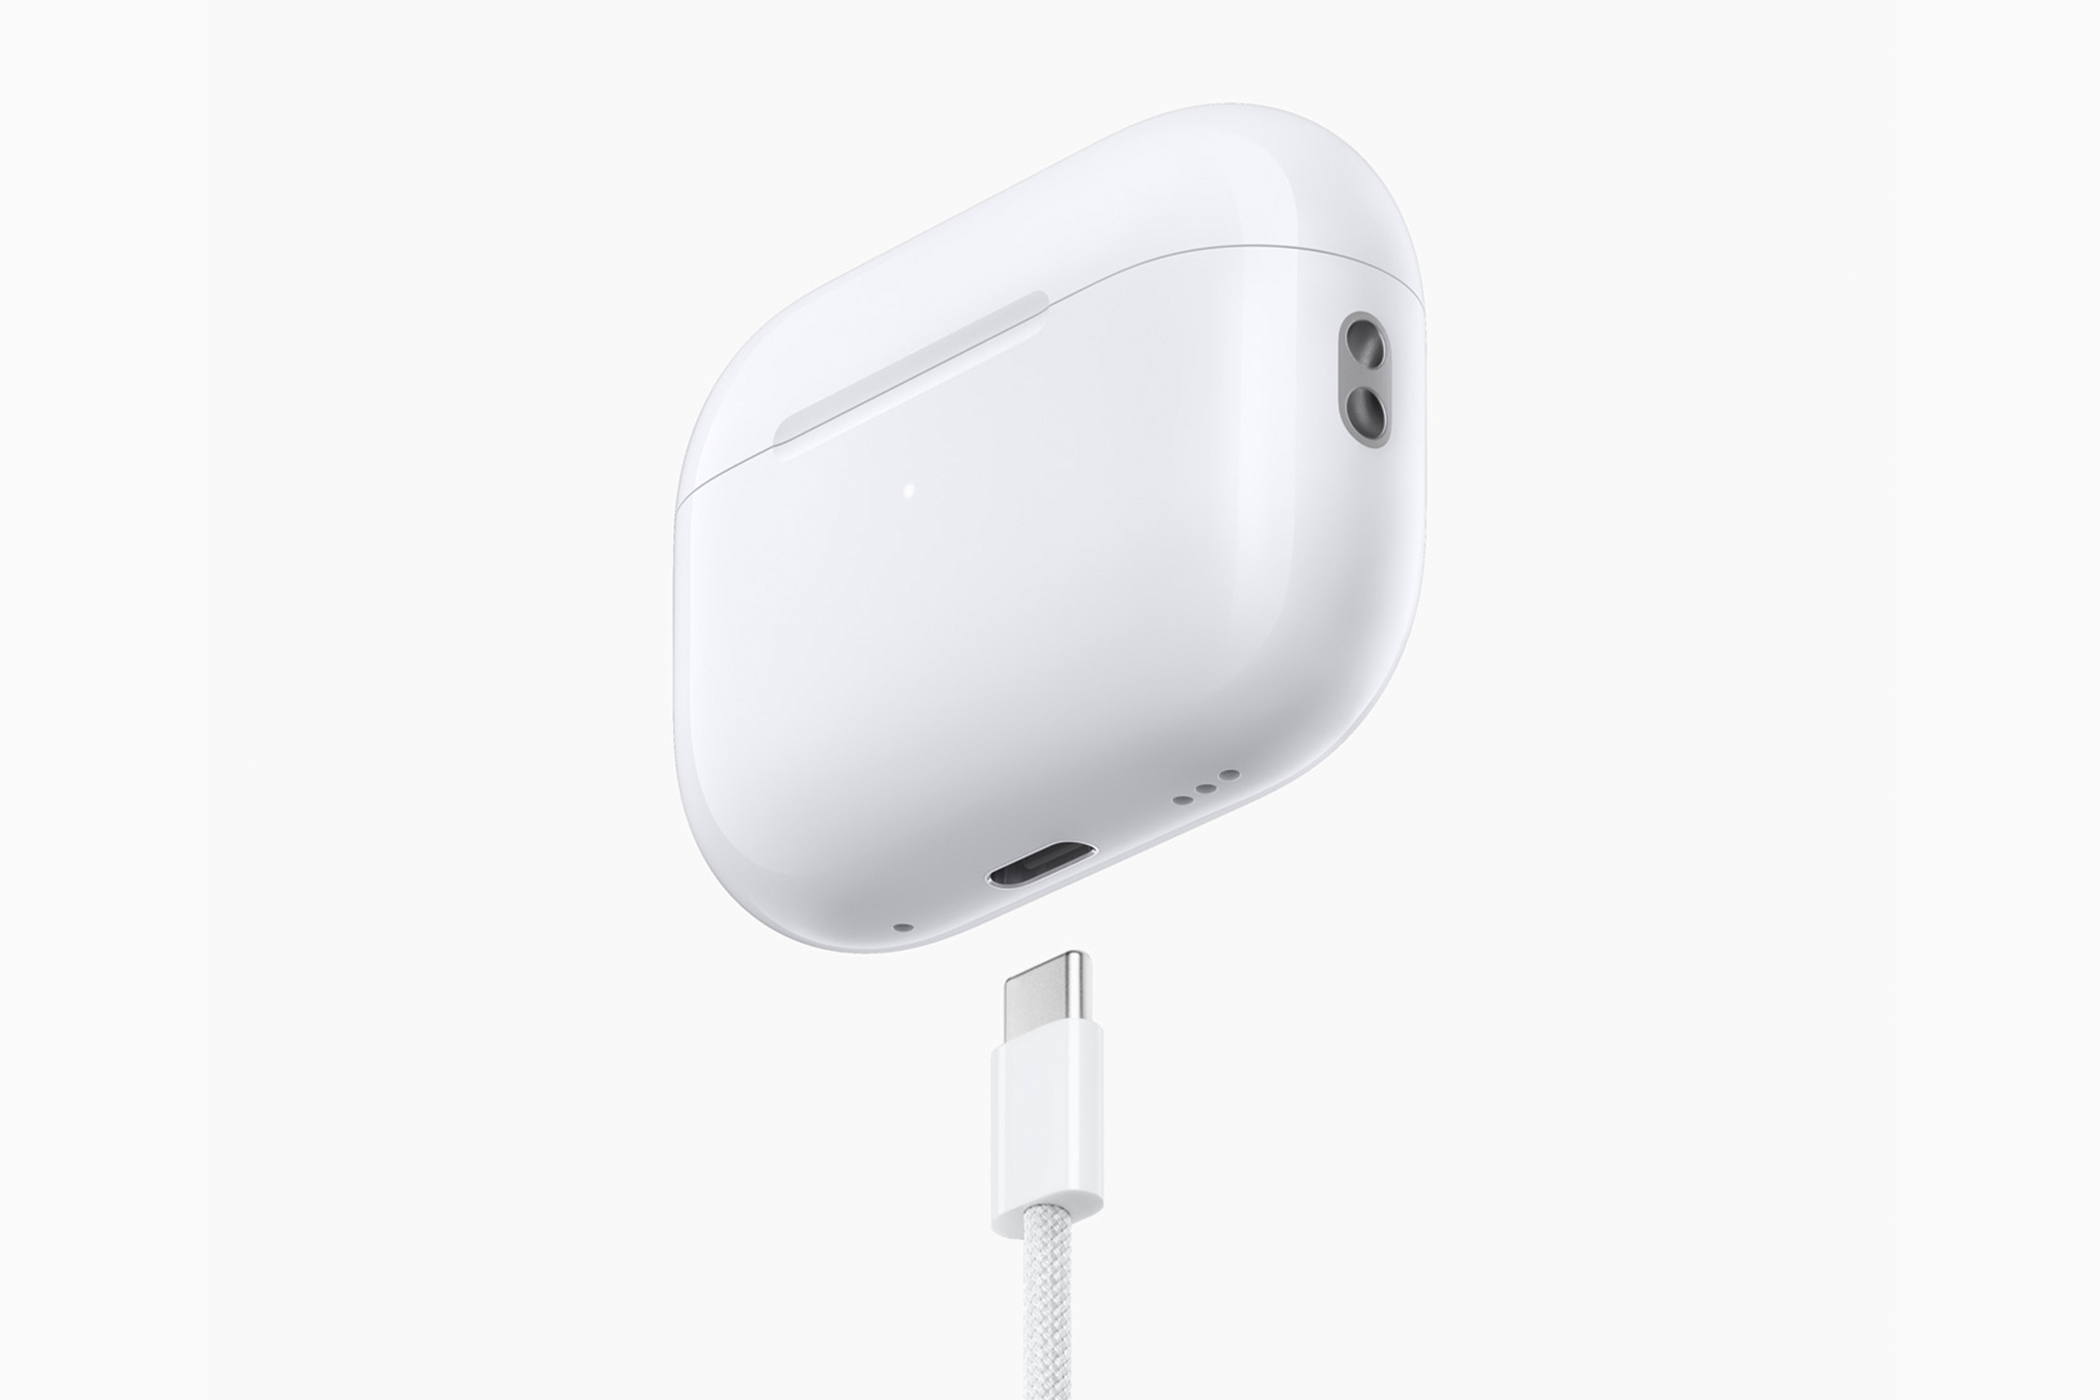 Apple AirPods Pro charging via USB-C cable